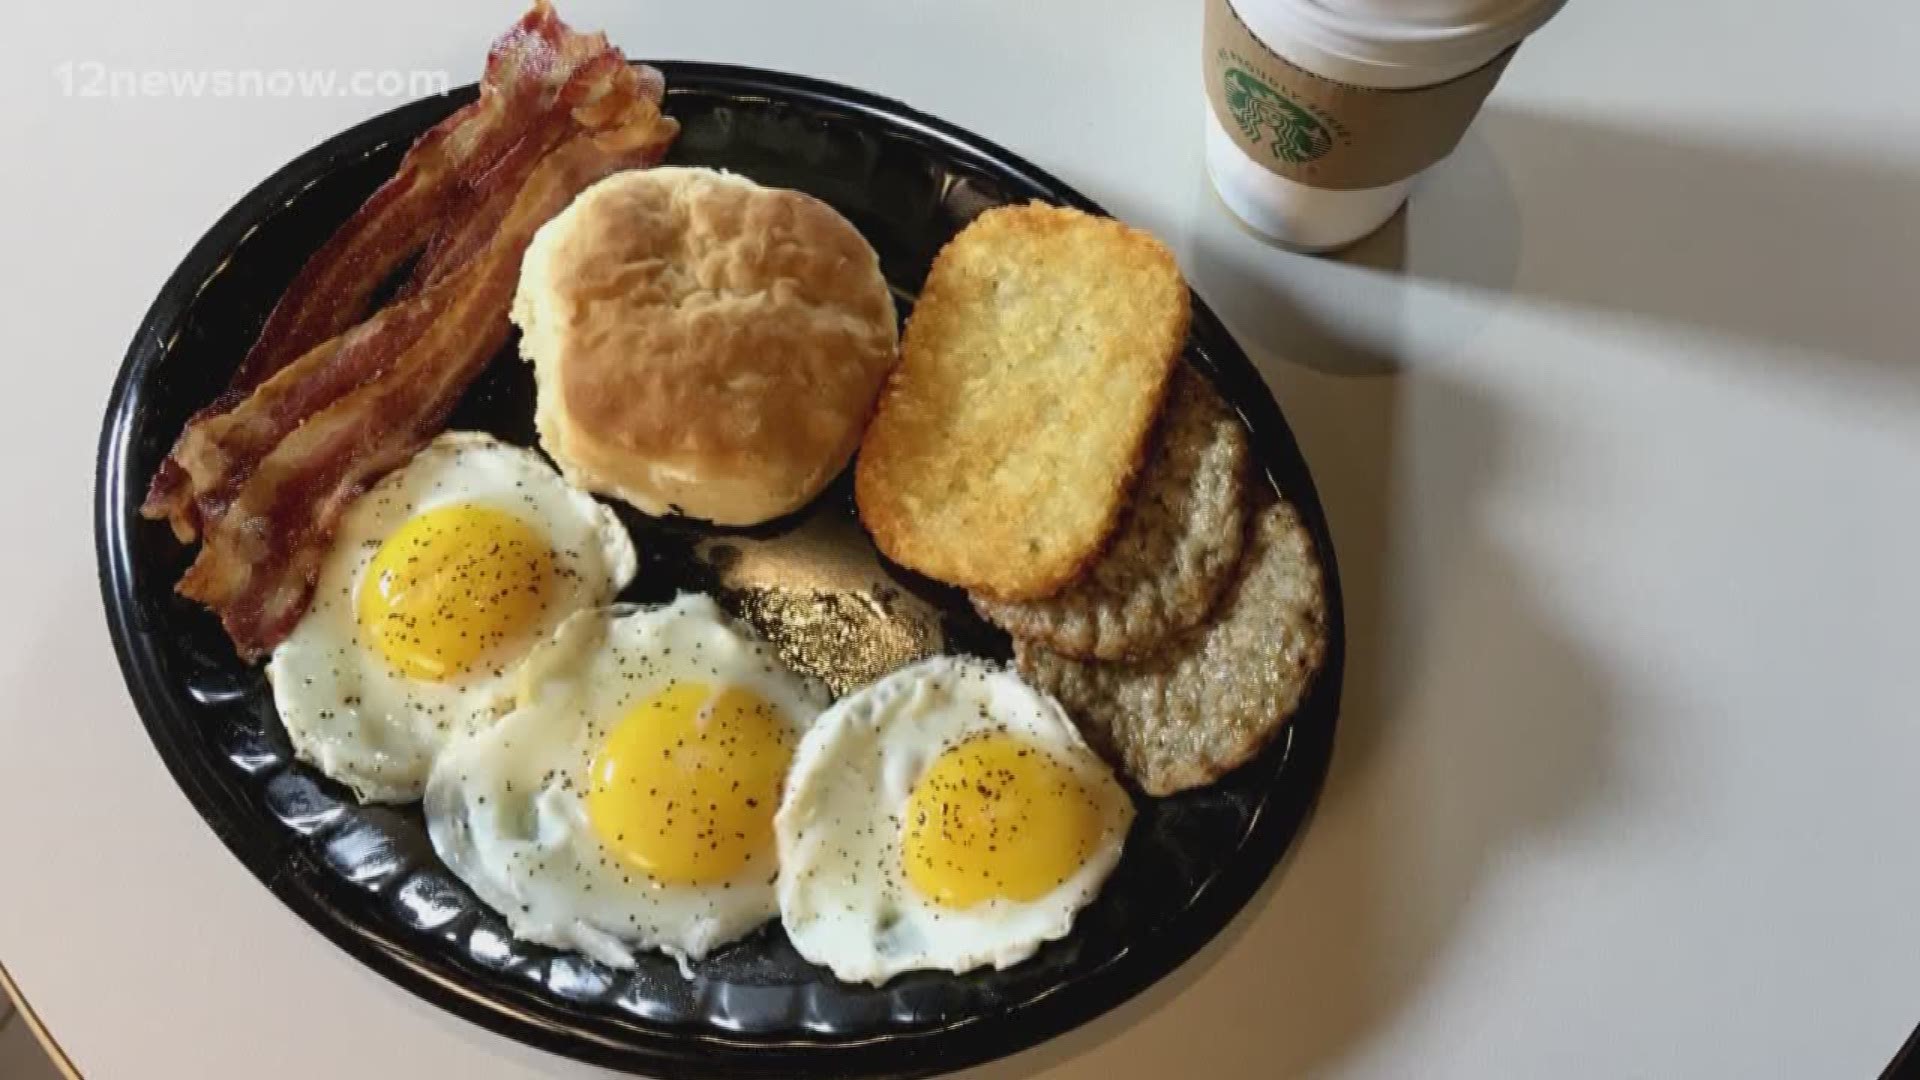 Fill up with a hearty breakfast to get you through the day from the Gator Grill!